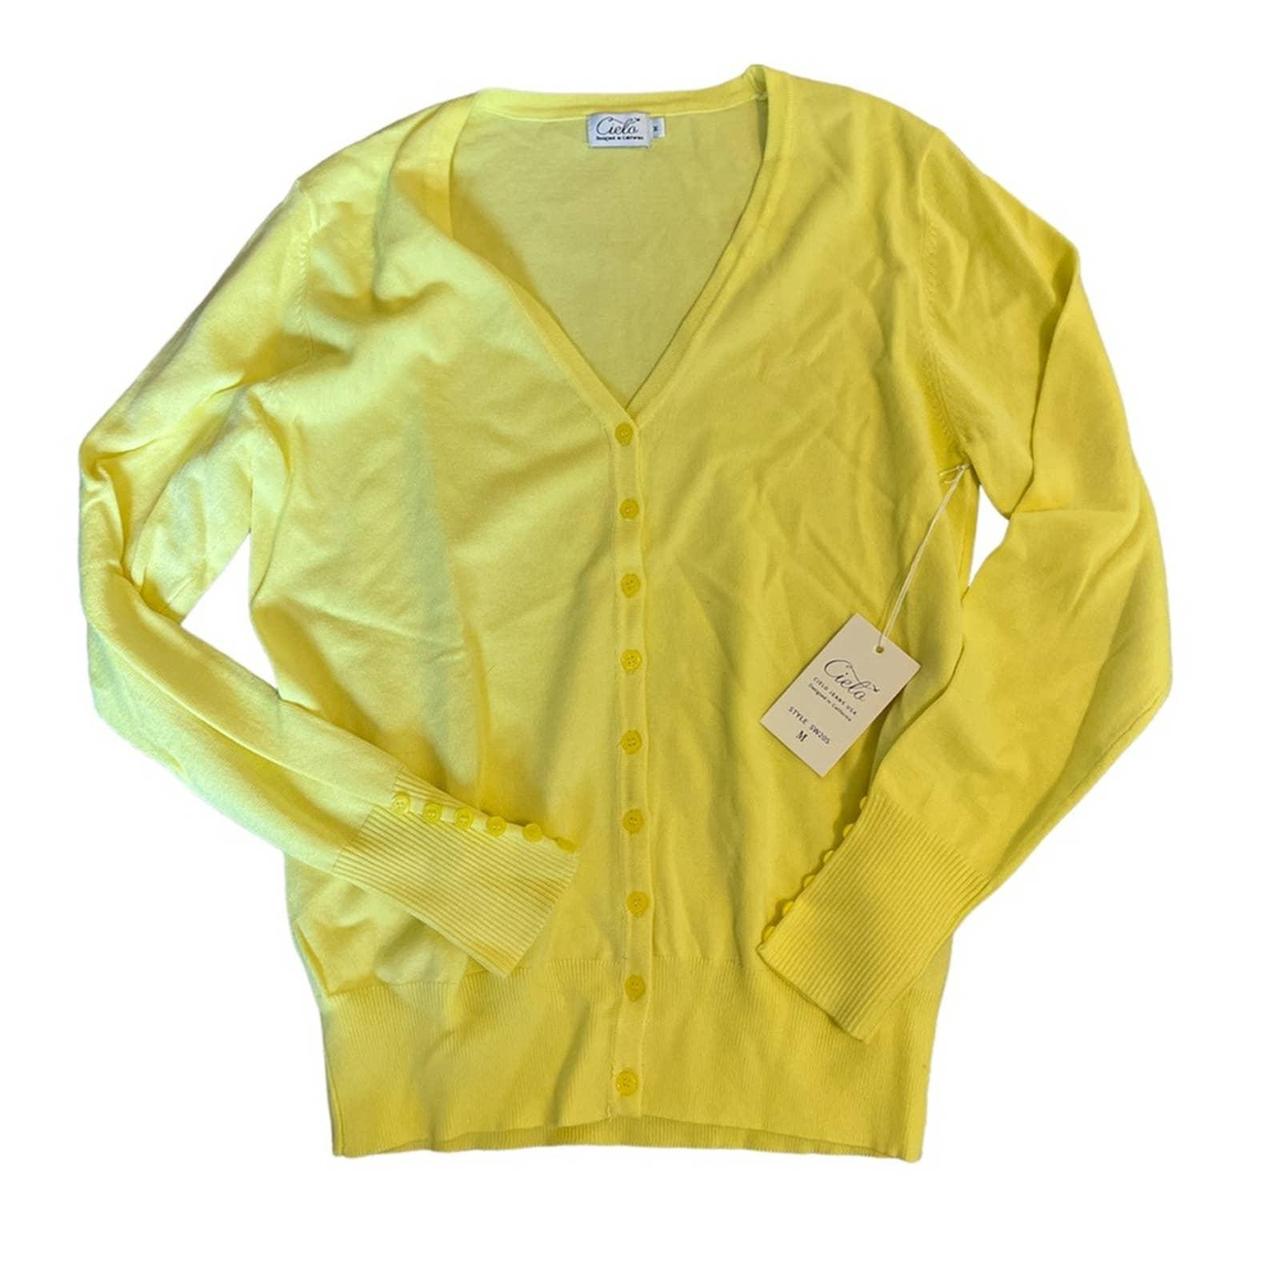 Celio Women's Gold and Yellow Jumper